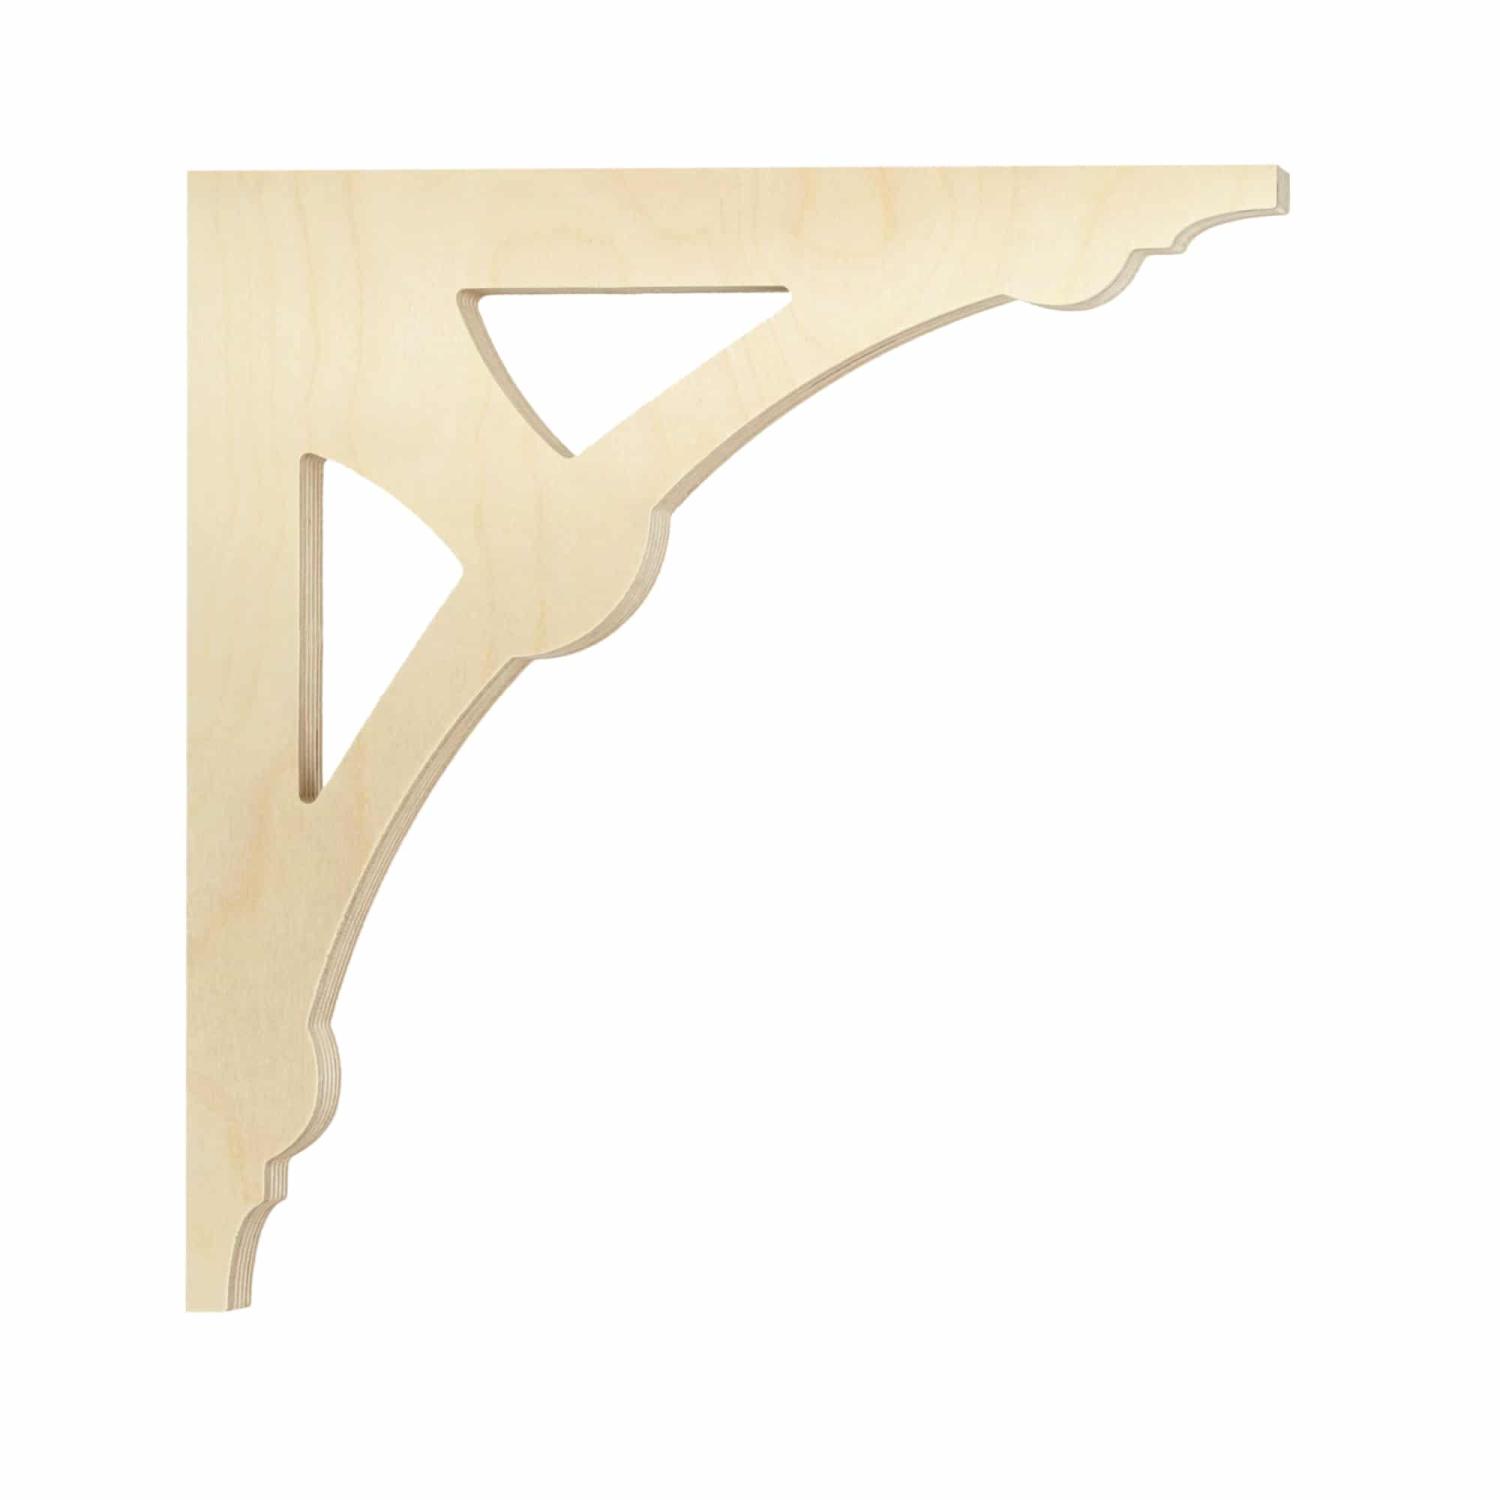 Bracket 012 - A classic wooden corbel & bracket with ornaments for porch, portico and veranda.